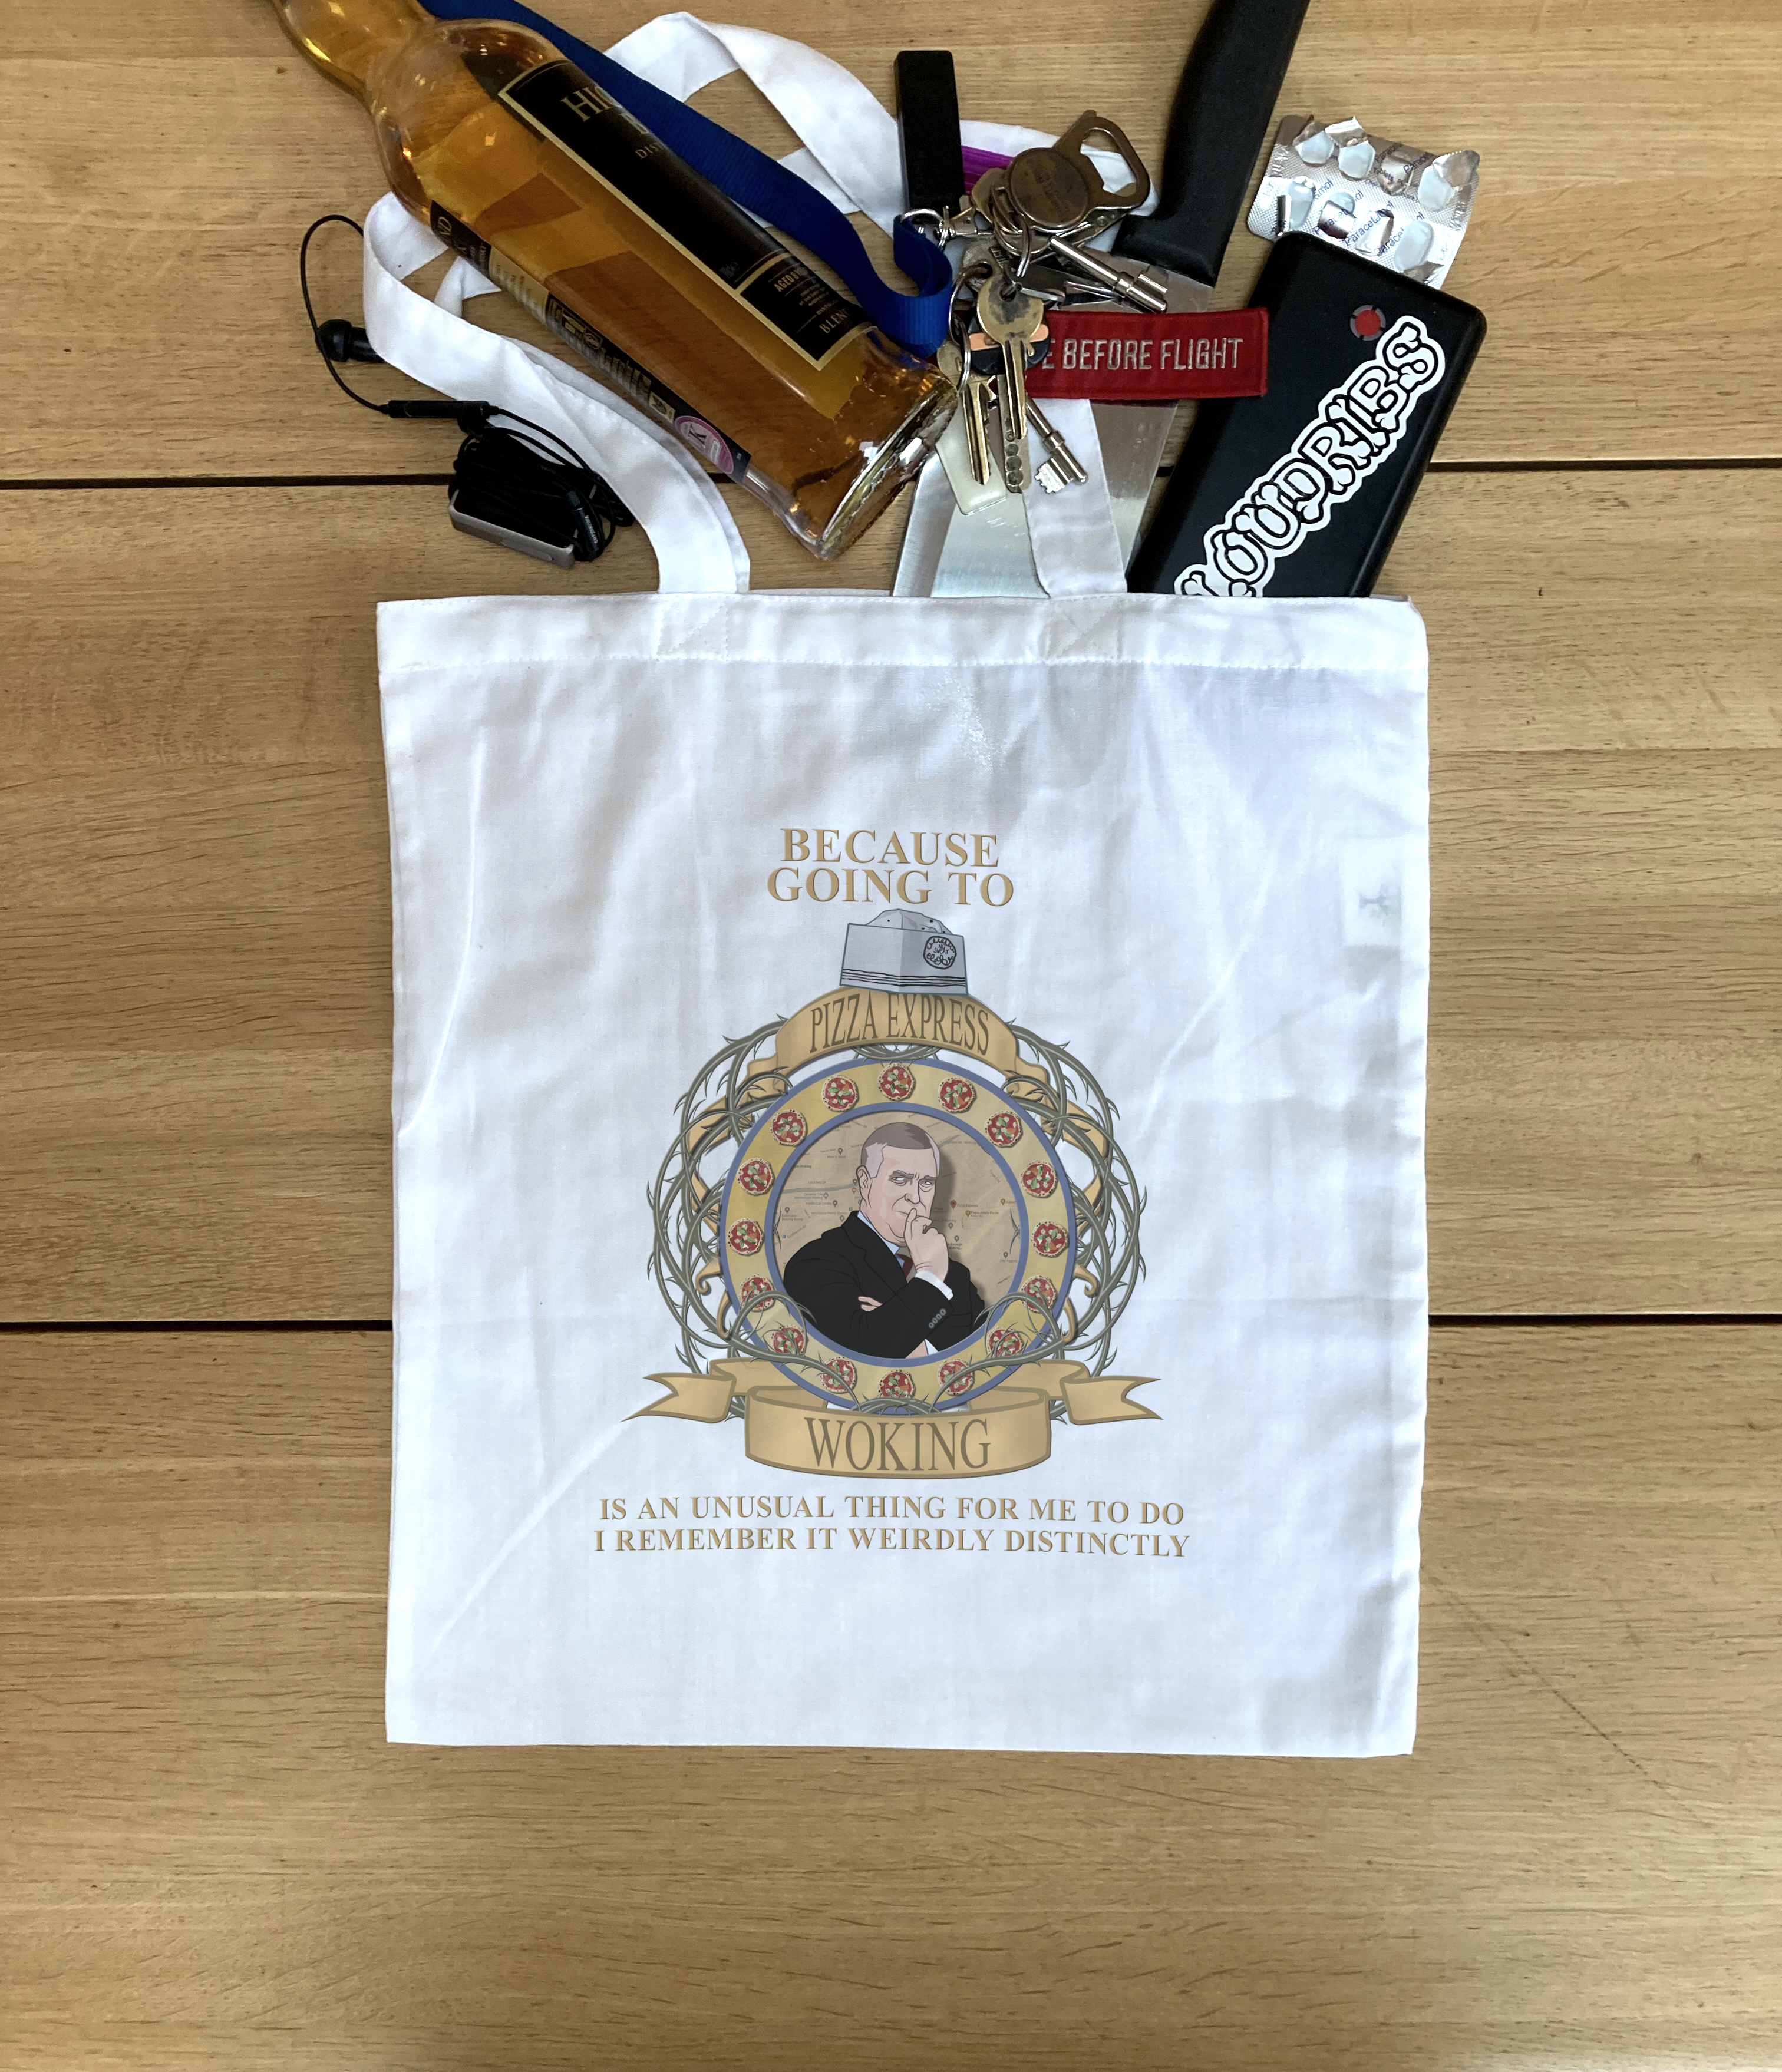 Prince Andrew Pizza Express Woking Commemorative White Soft Tote Bag - 41cm  x 37cm 